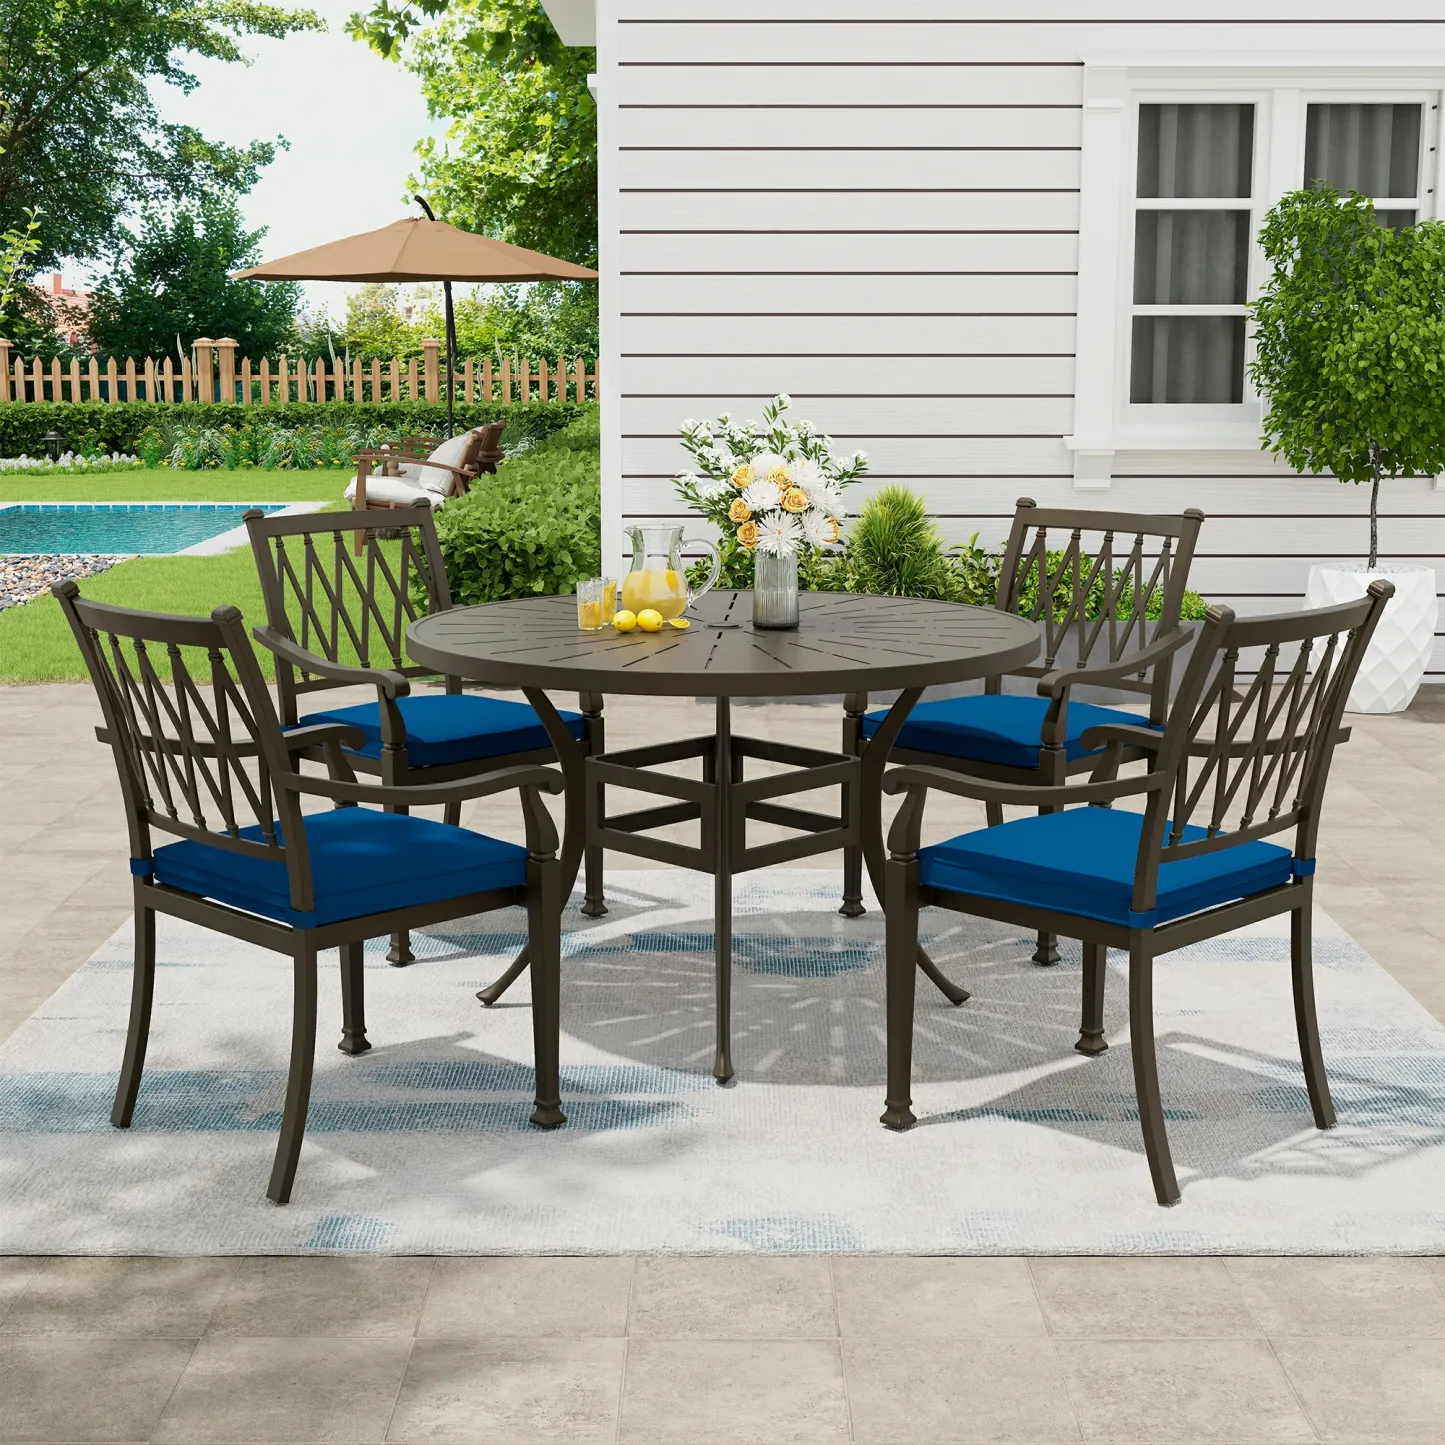 5 Pieces Cast Aluminum Outdoor Dining Set 4 Ergonomic Design Outdoor Chair with Cushions and 1 Round Table with 2.1 Inch Umbrella Hole